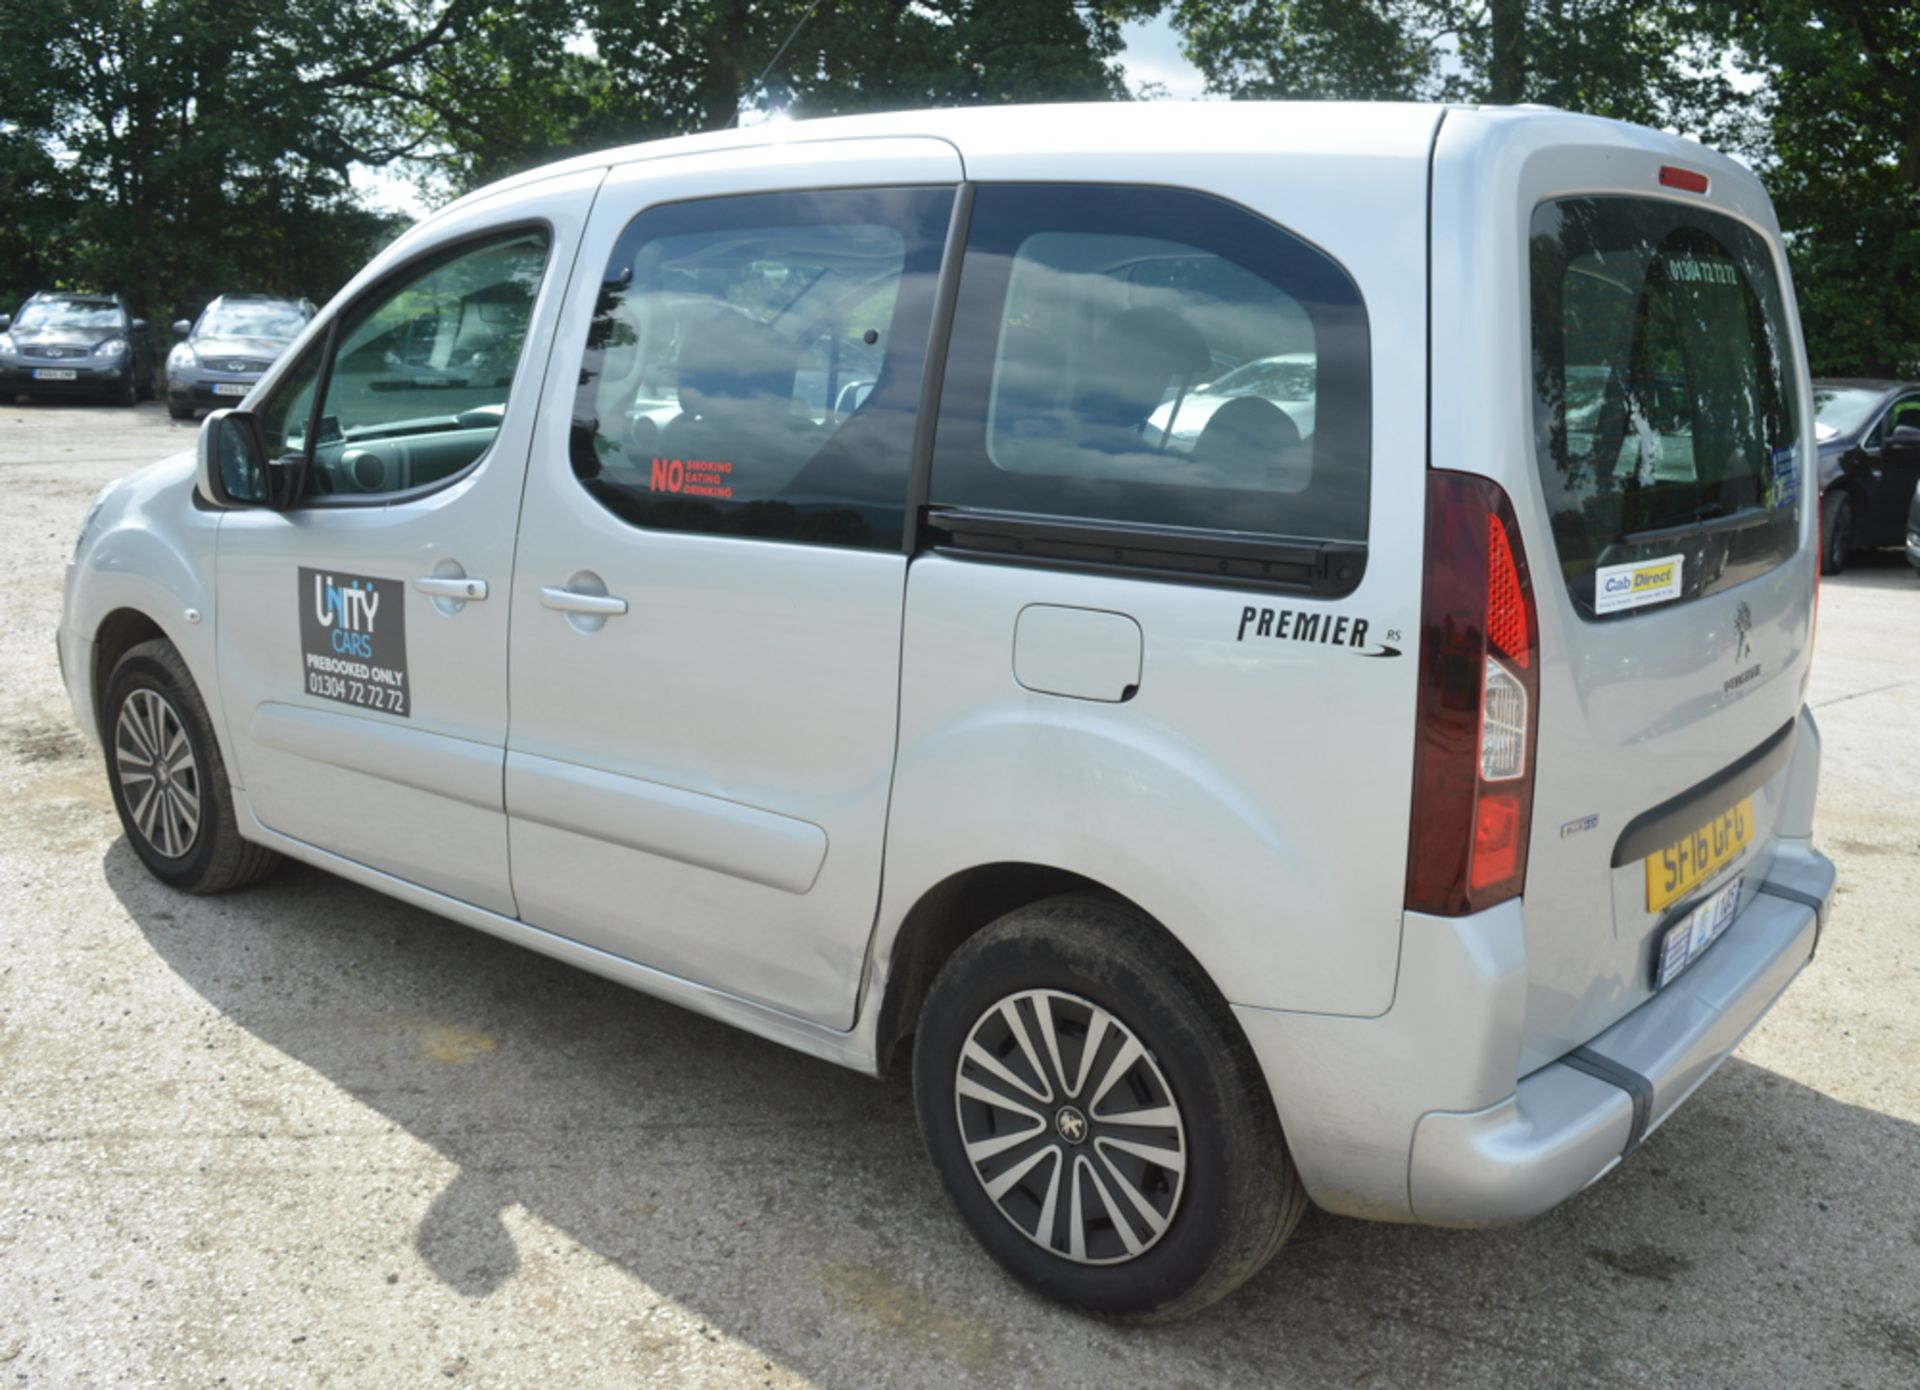 Peugeot Premier RS Blue HDI S/S 5 seat wheelchair access MPV Registration number: SF16 GFG Date of - Image 3 of 11